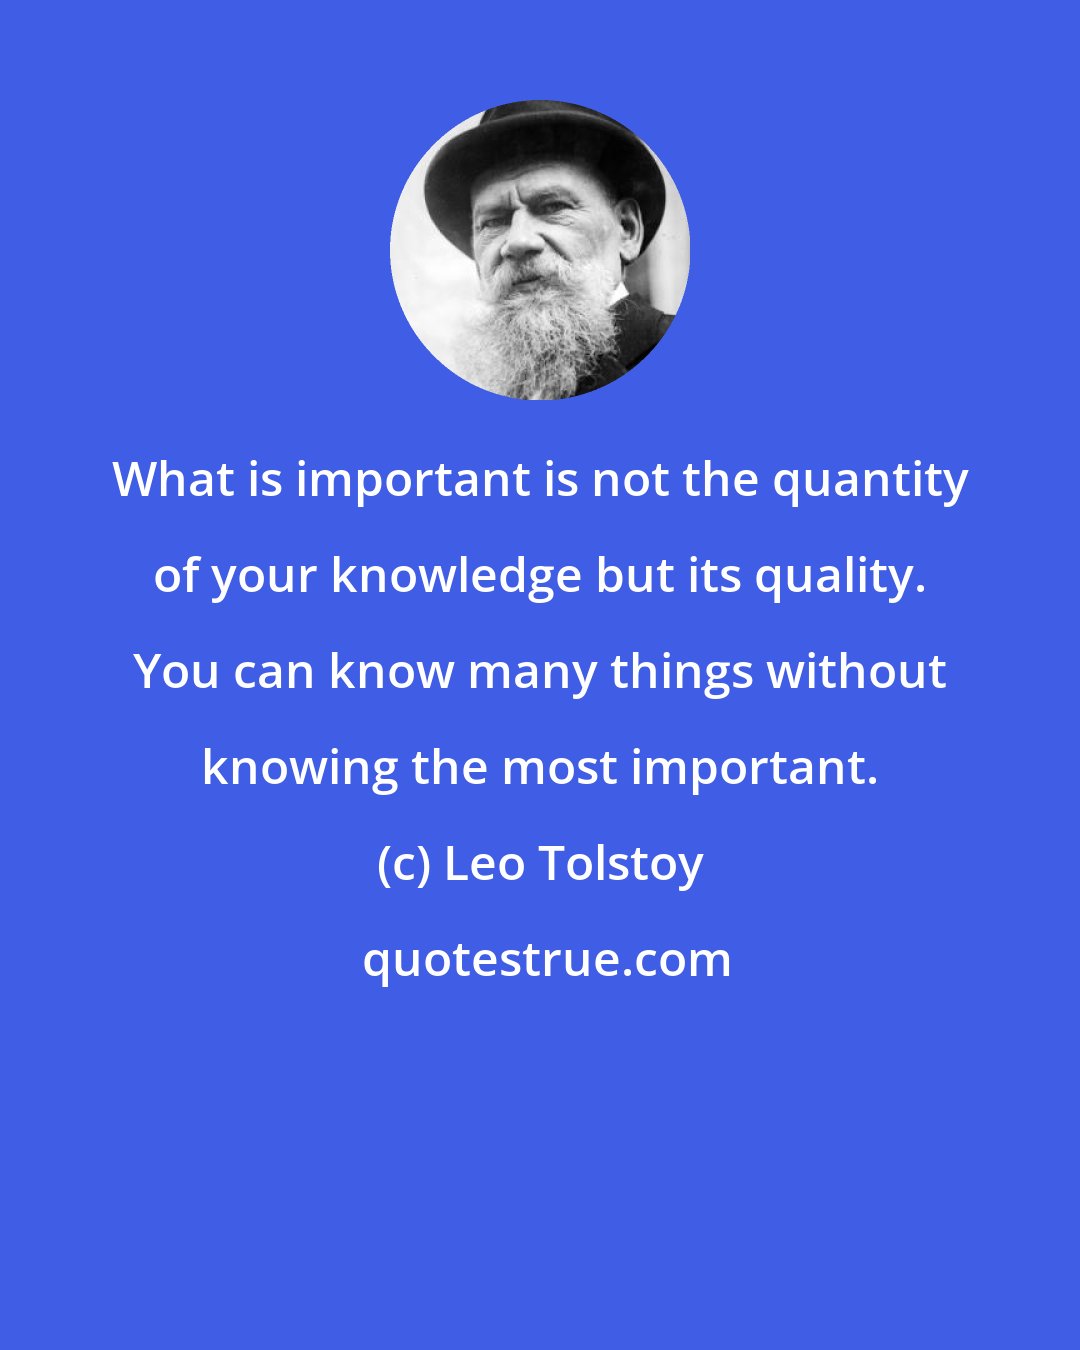 Leo Tolstoy: What is important is not the quantity of your knowledge but its quality. You can know many things without knowing the most important.